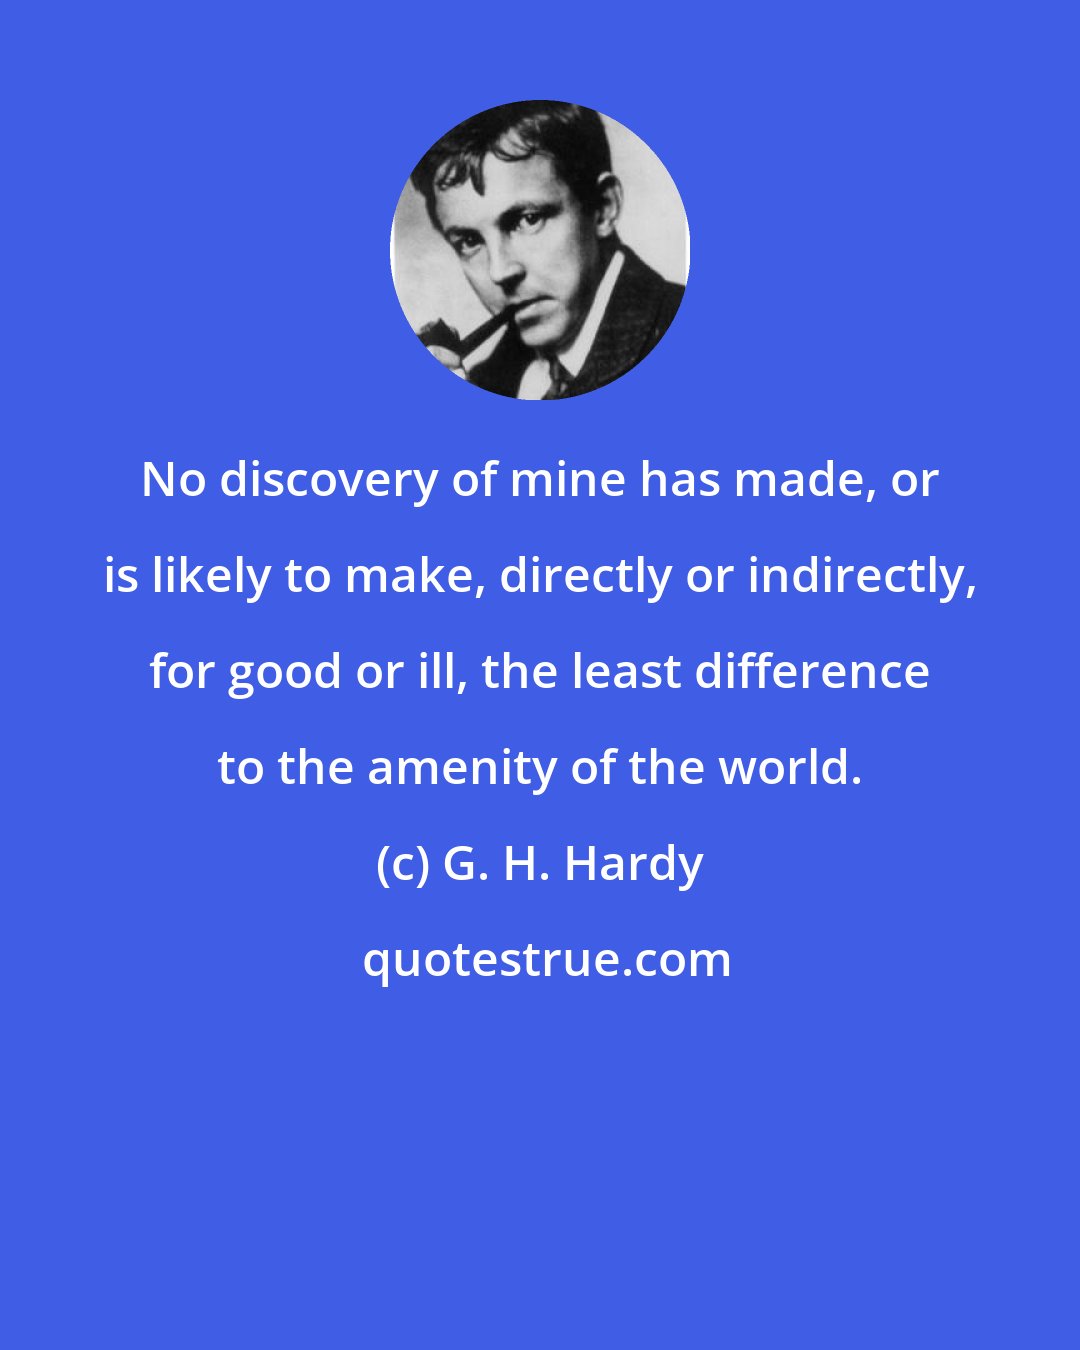 G. H. Hardy: No discovery of mine has made, or is likely to make, directly or indirectly, for good or ill, the least difference to the amenity of the world.